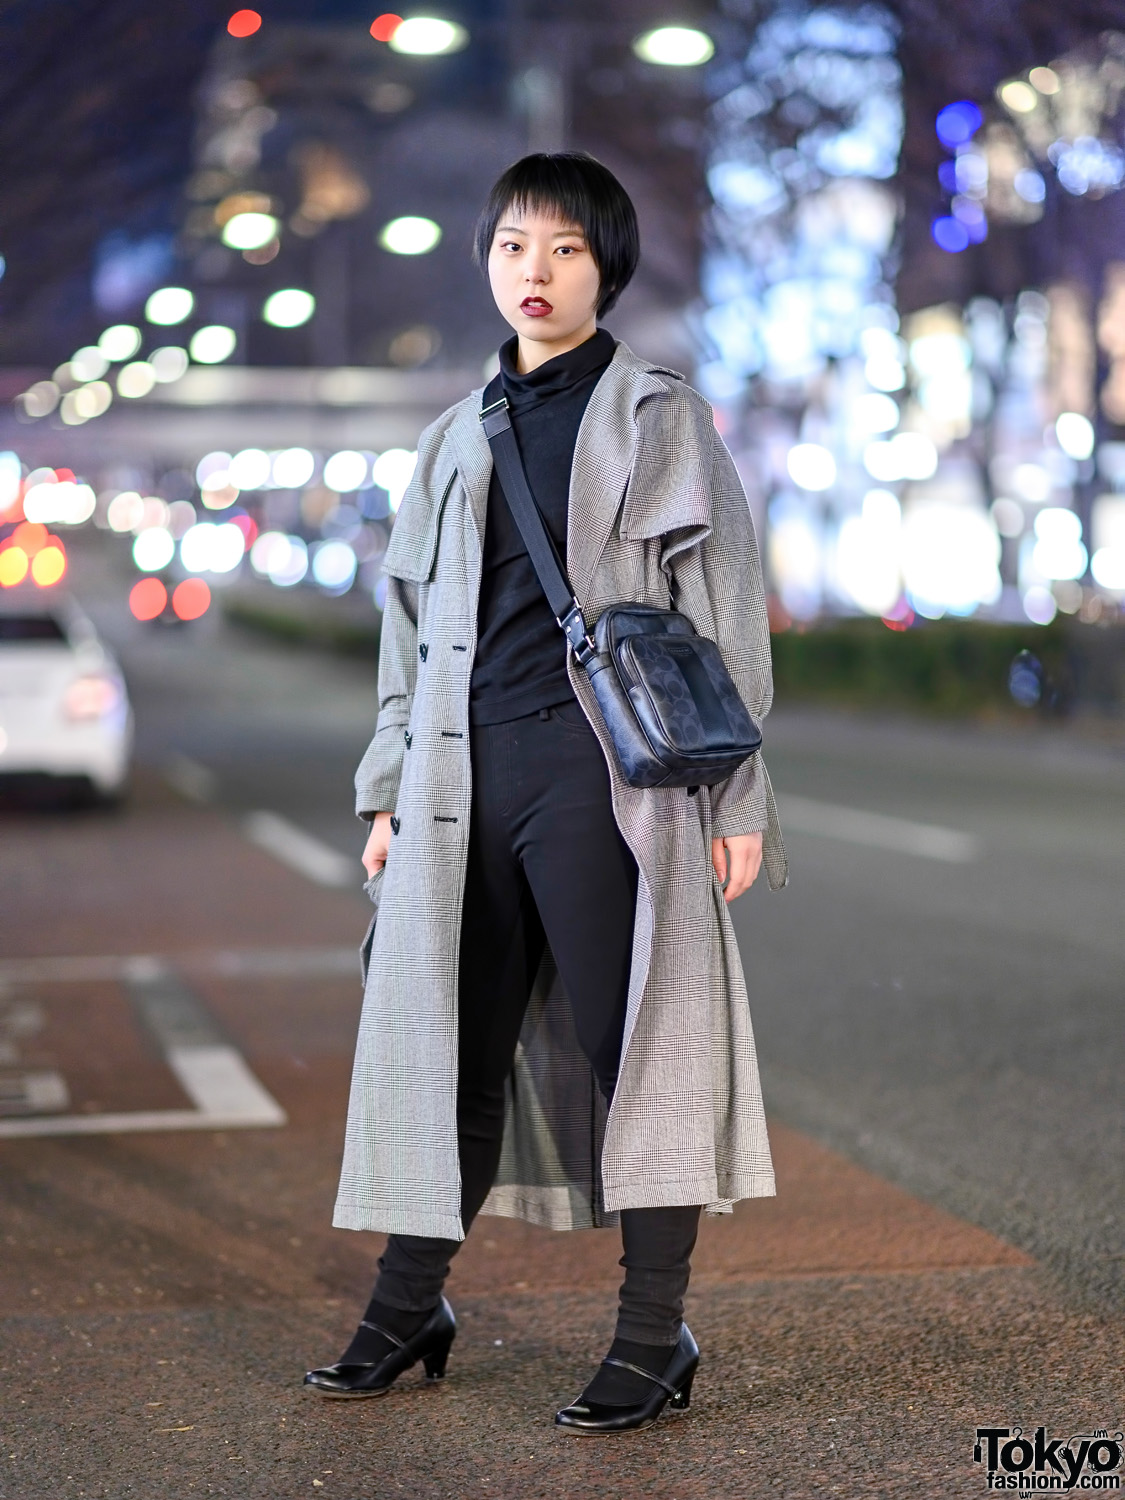 Tokyo Minimalist Street Style w/ Urban Research Houndstooth Trench Coat, Skinny Jeans, Heeled Shoes & Coach Crossbody Bag